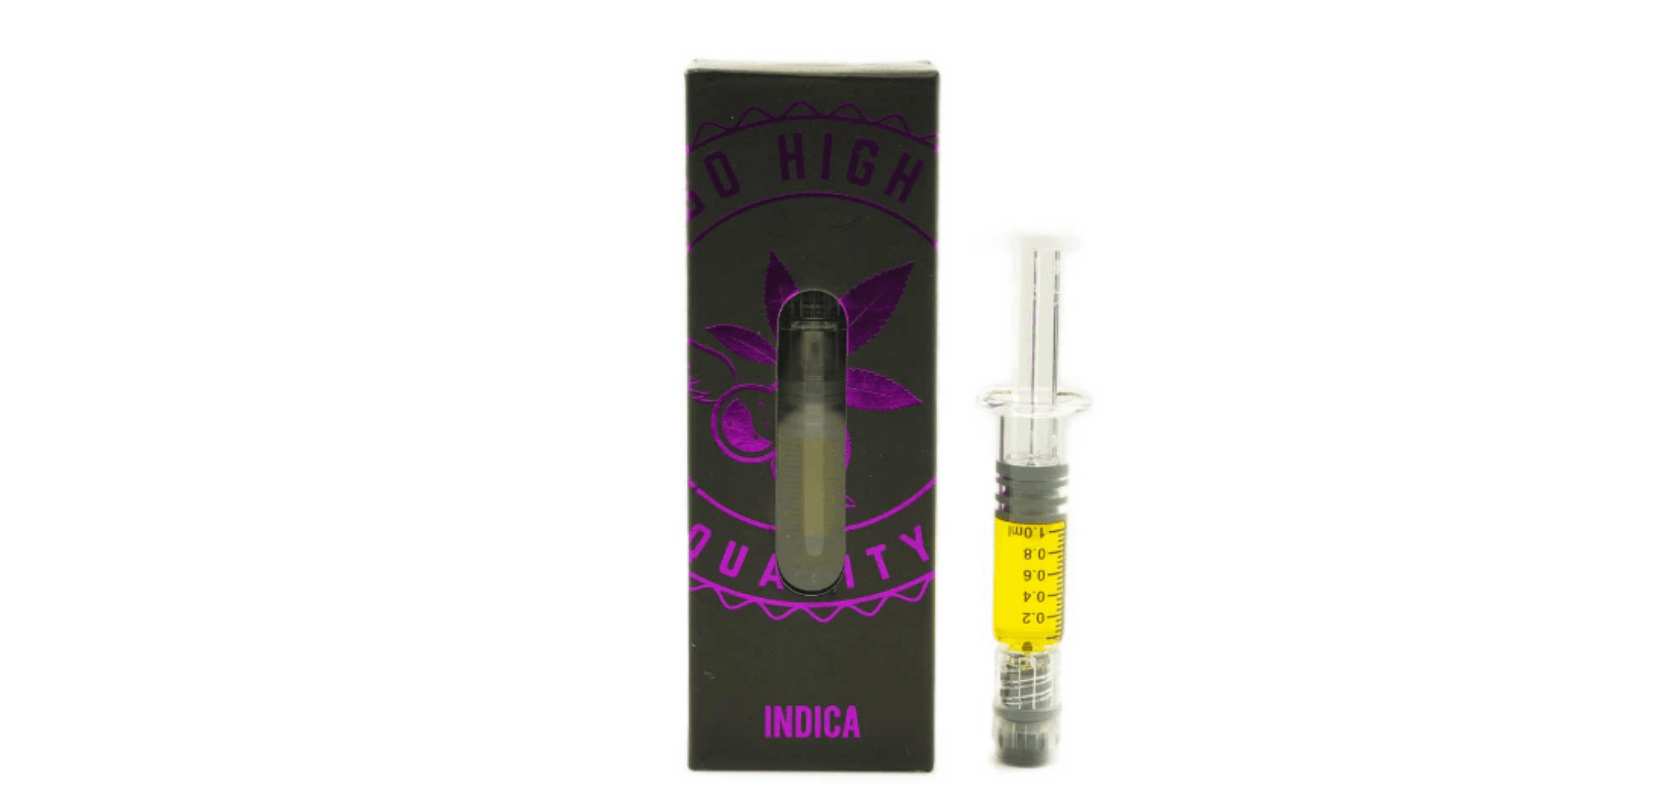 According to stoners, So High Extracts will give you the best syringe for distillate. Just try out the Granddaddy Purple Distillate Syringe (Indica) and test it out yourself! 